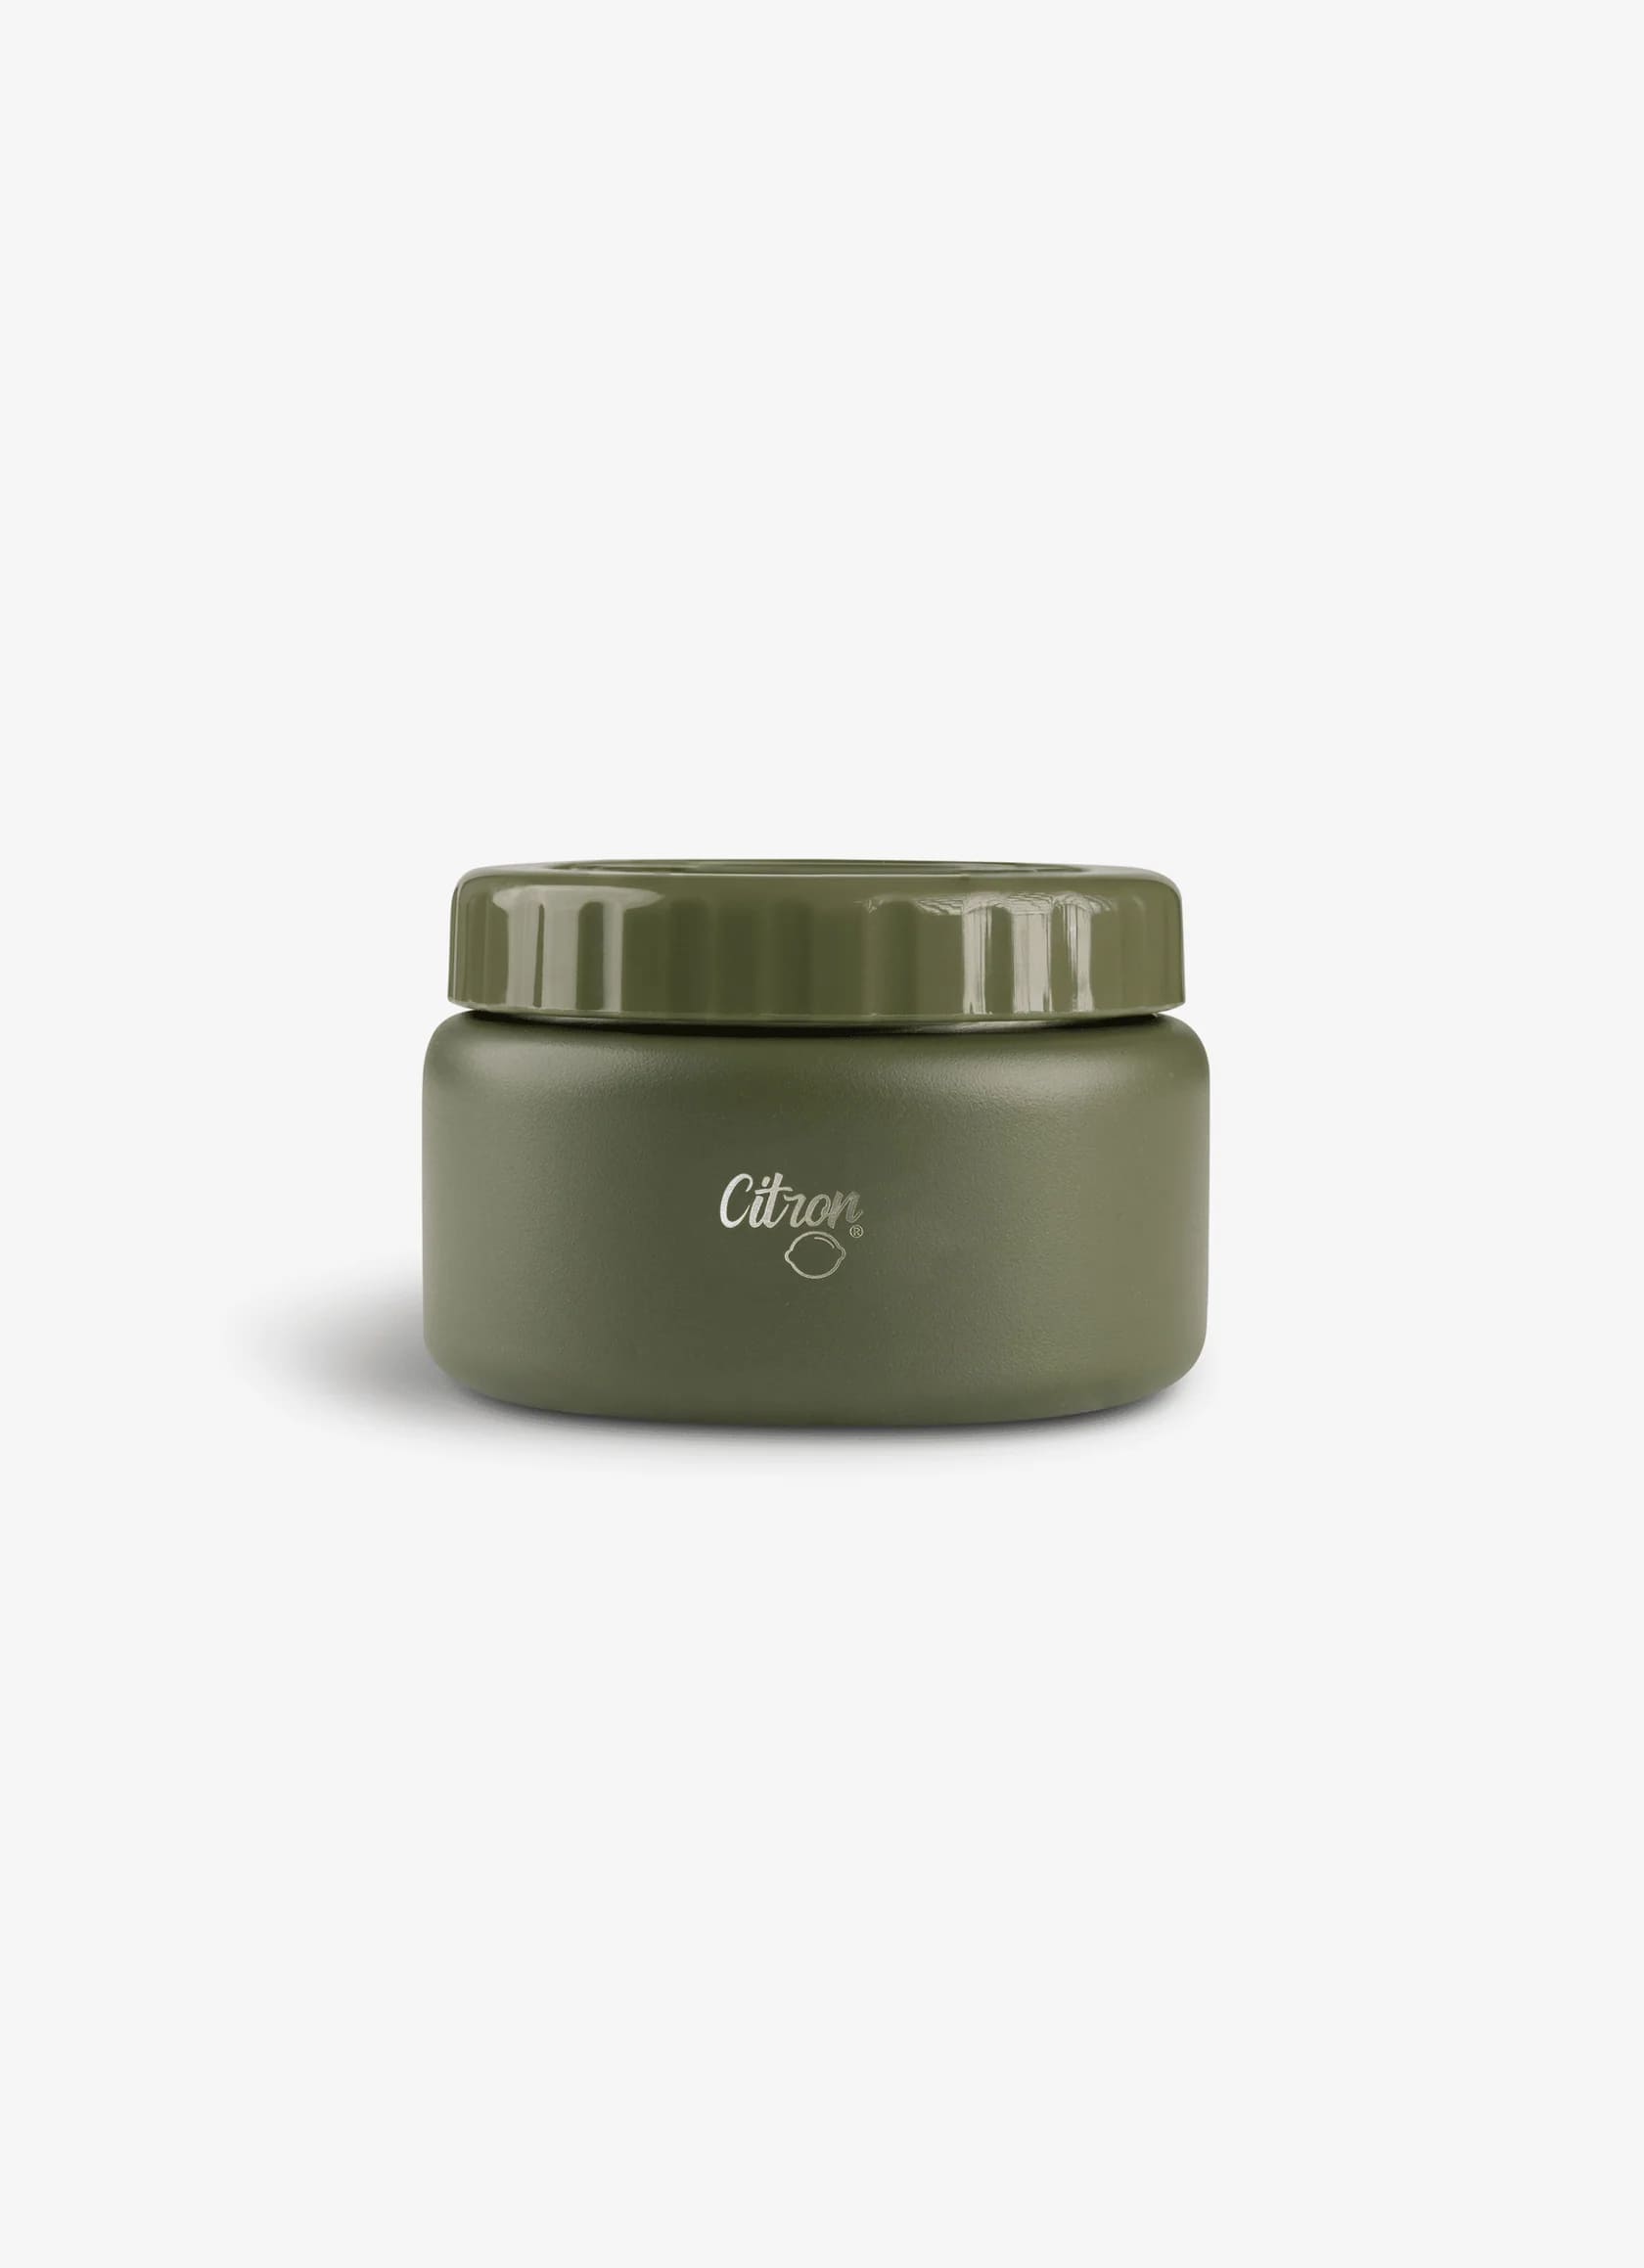 Citron Stainless Steel Insulated Food Jar 250ml - Green